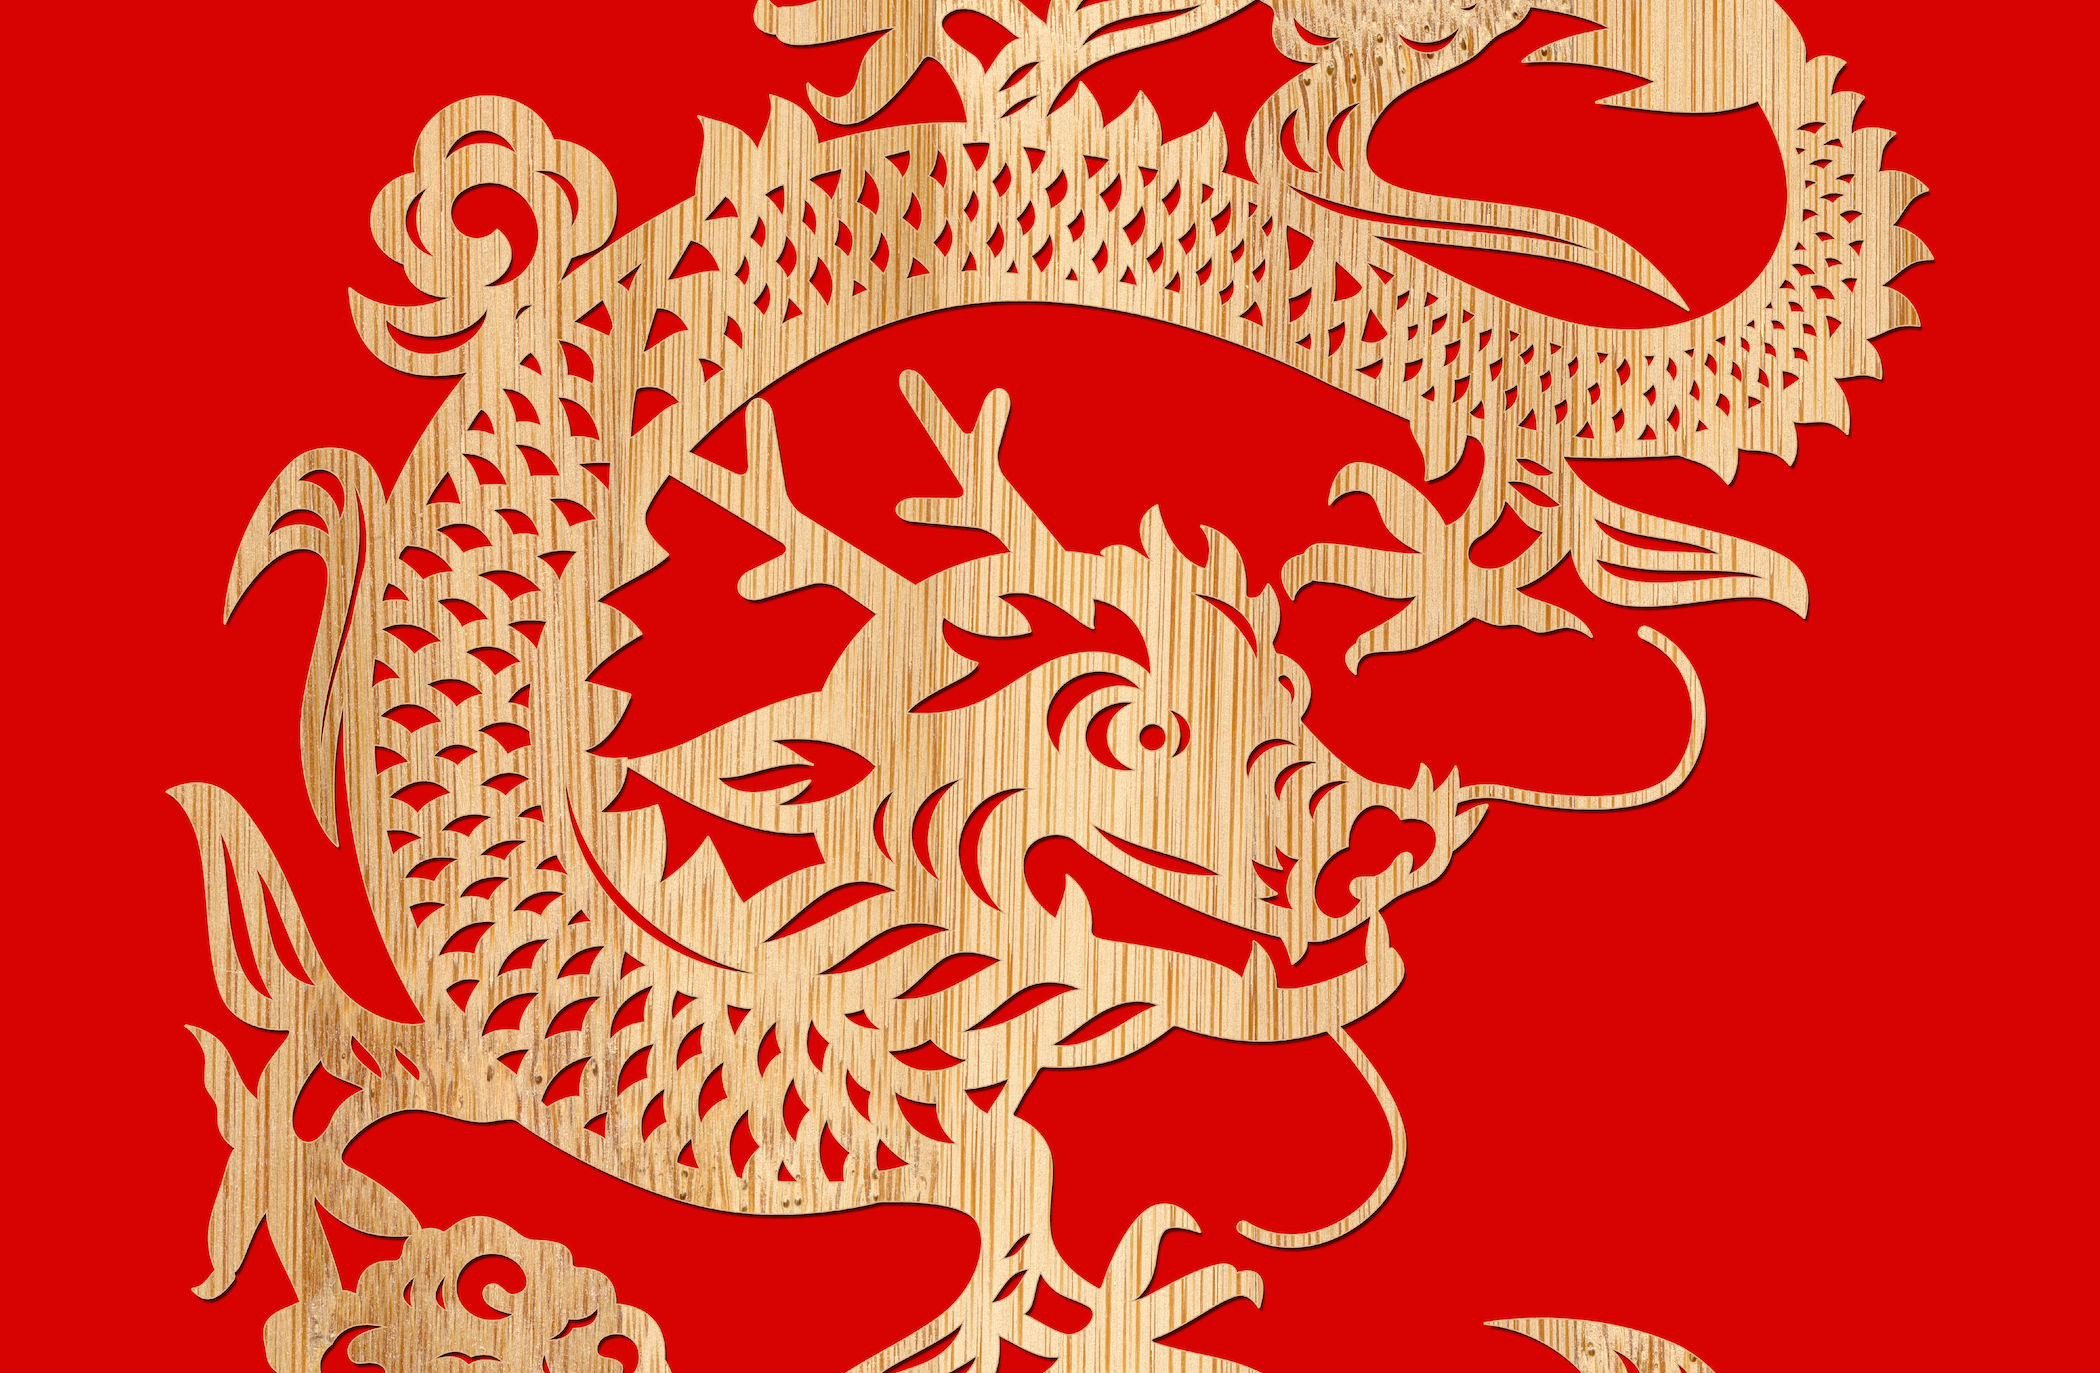 What is special about the Year of the Wood Dragon 2024? : r